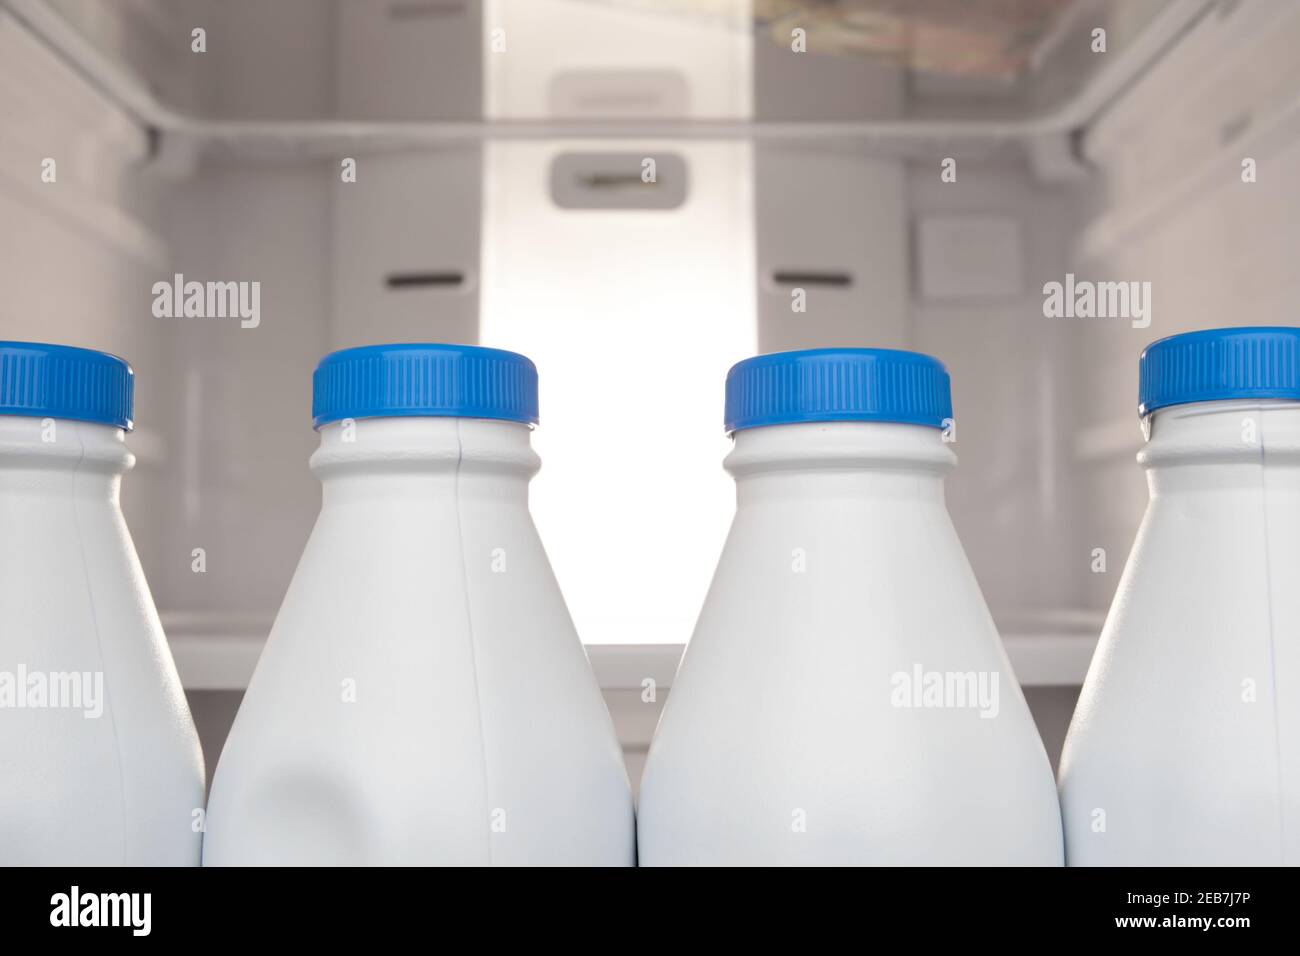 https://c8.alamy.com/comp/2EB7J7P/group-of-plastic-milk-bottle-stored-and-lined-up-in-refrigerator-door-2EB7J7P.jpg